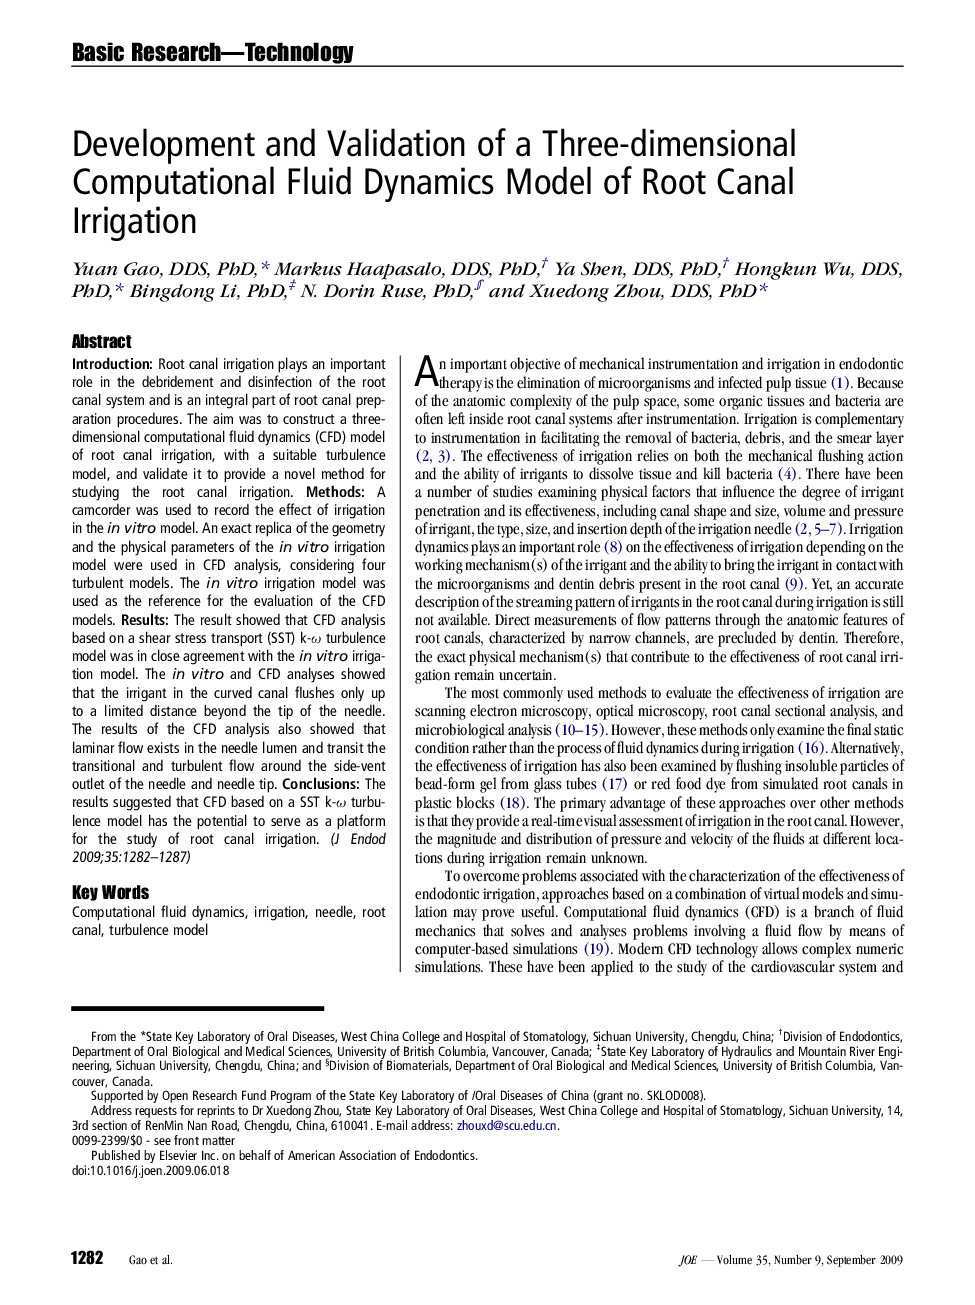 Development and Validation of a Three-dimensional Computational Fluid Dynamics Model of Root Canal Irrigation 